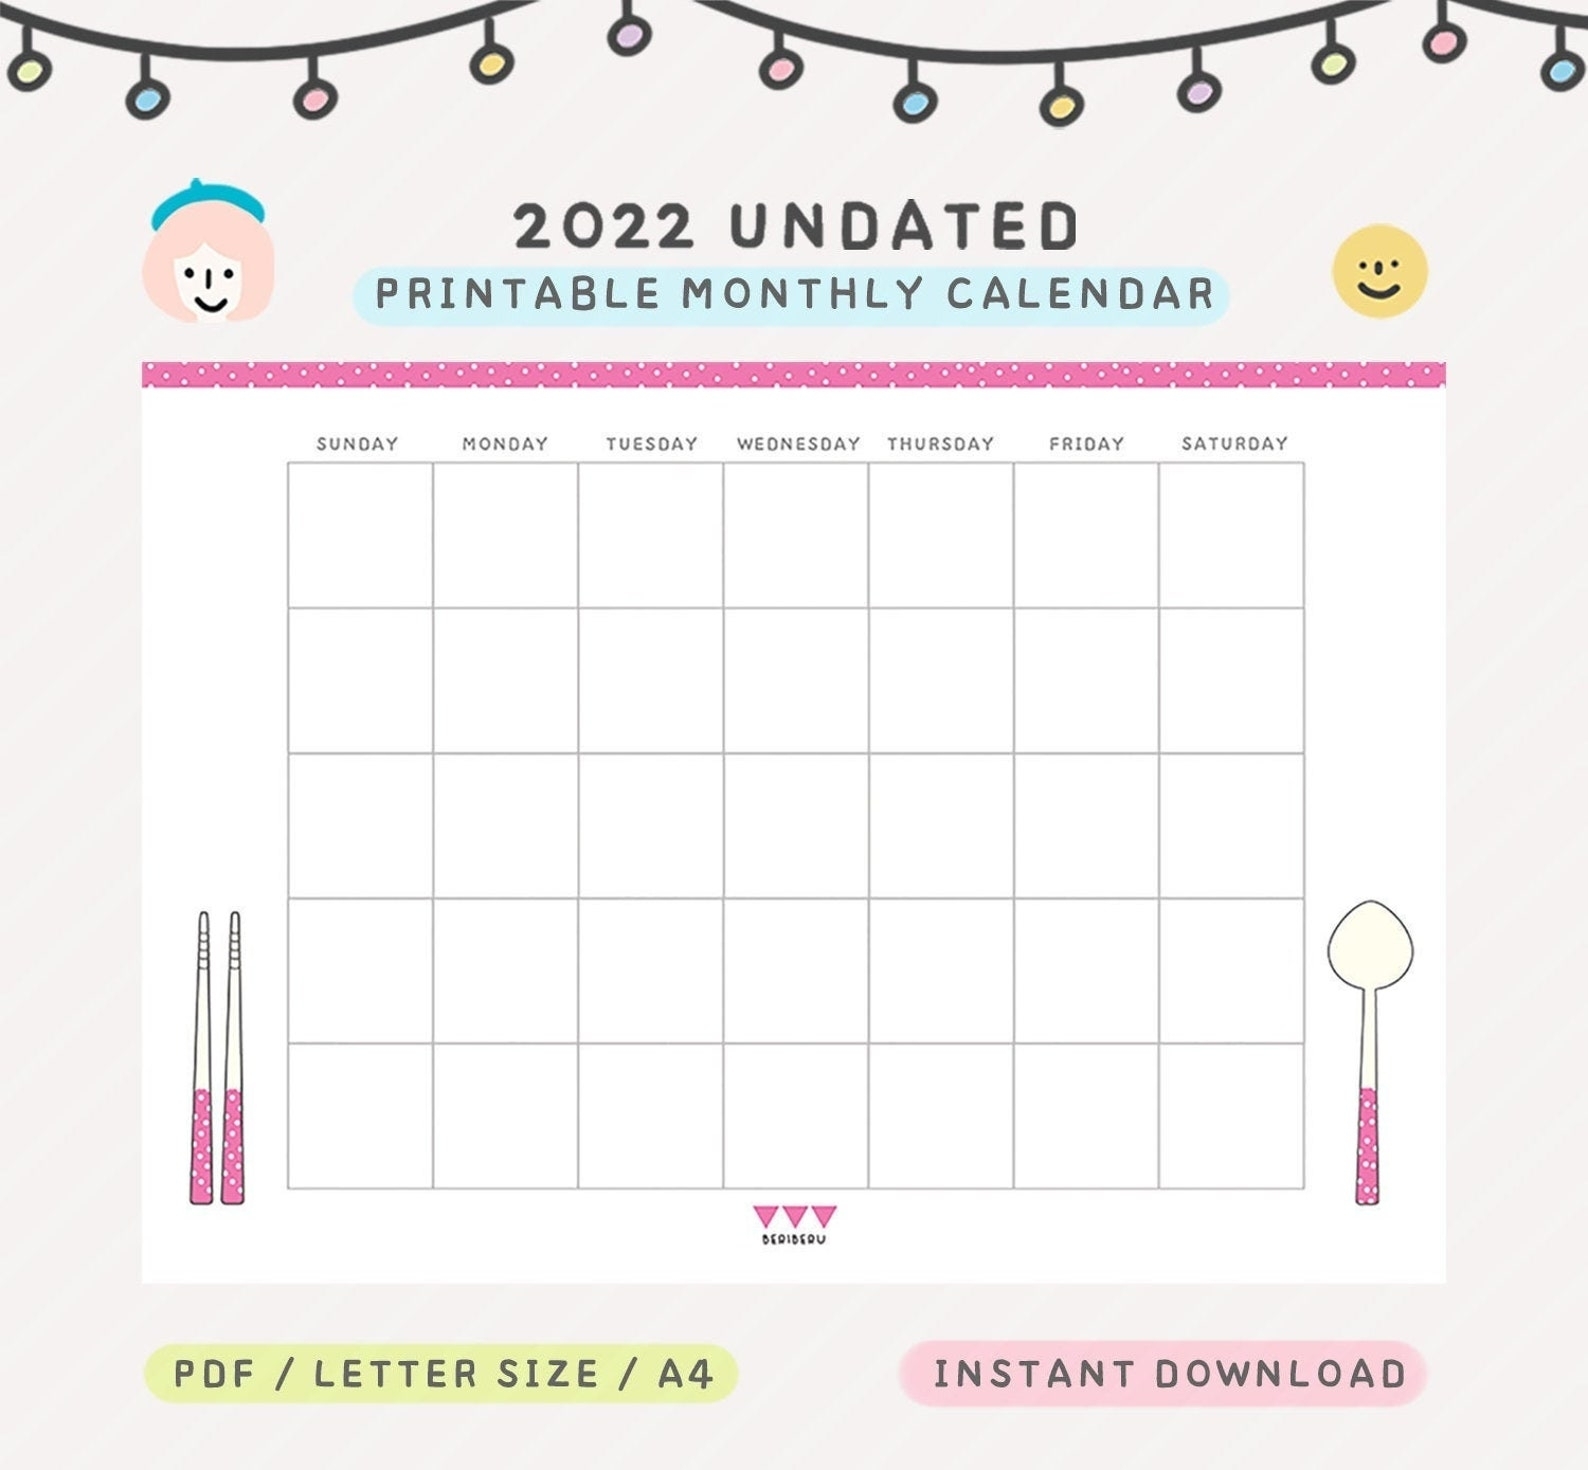 New 2021 2022 Printable Monthly Undated Calendar Cute | Etsy